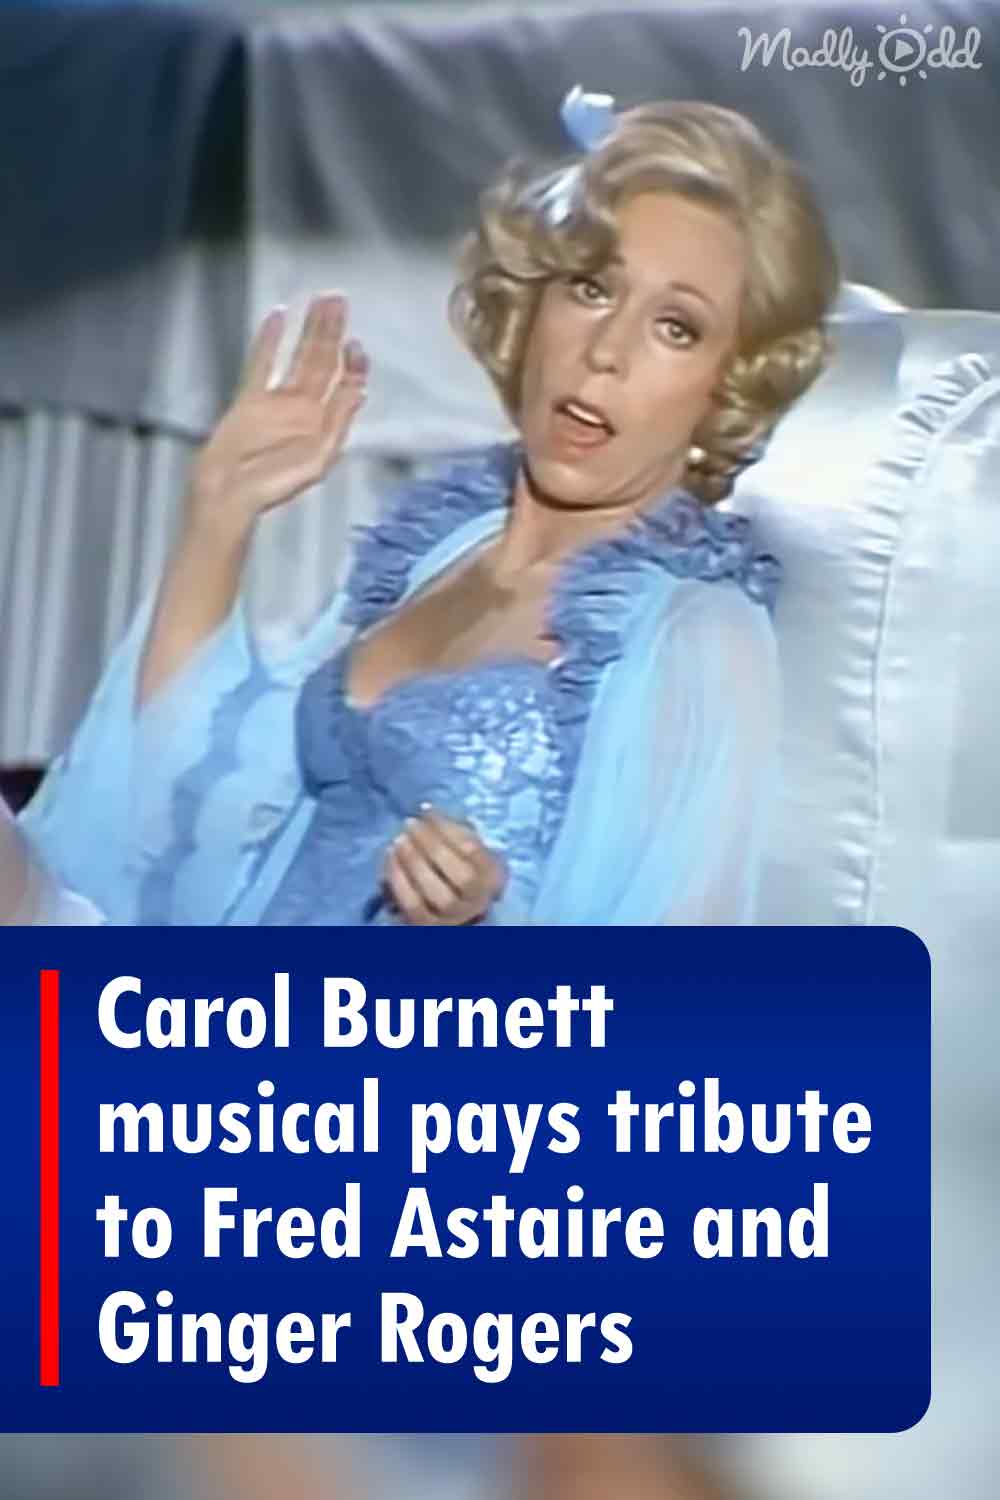 Carol Burnett musical pays tribute to Fred Astaire and Ginger Rogers